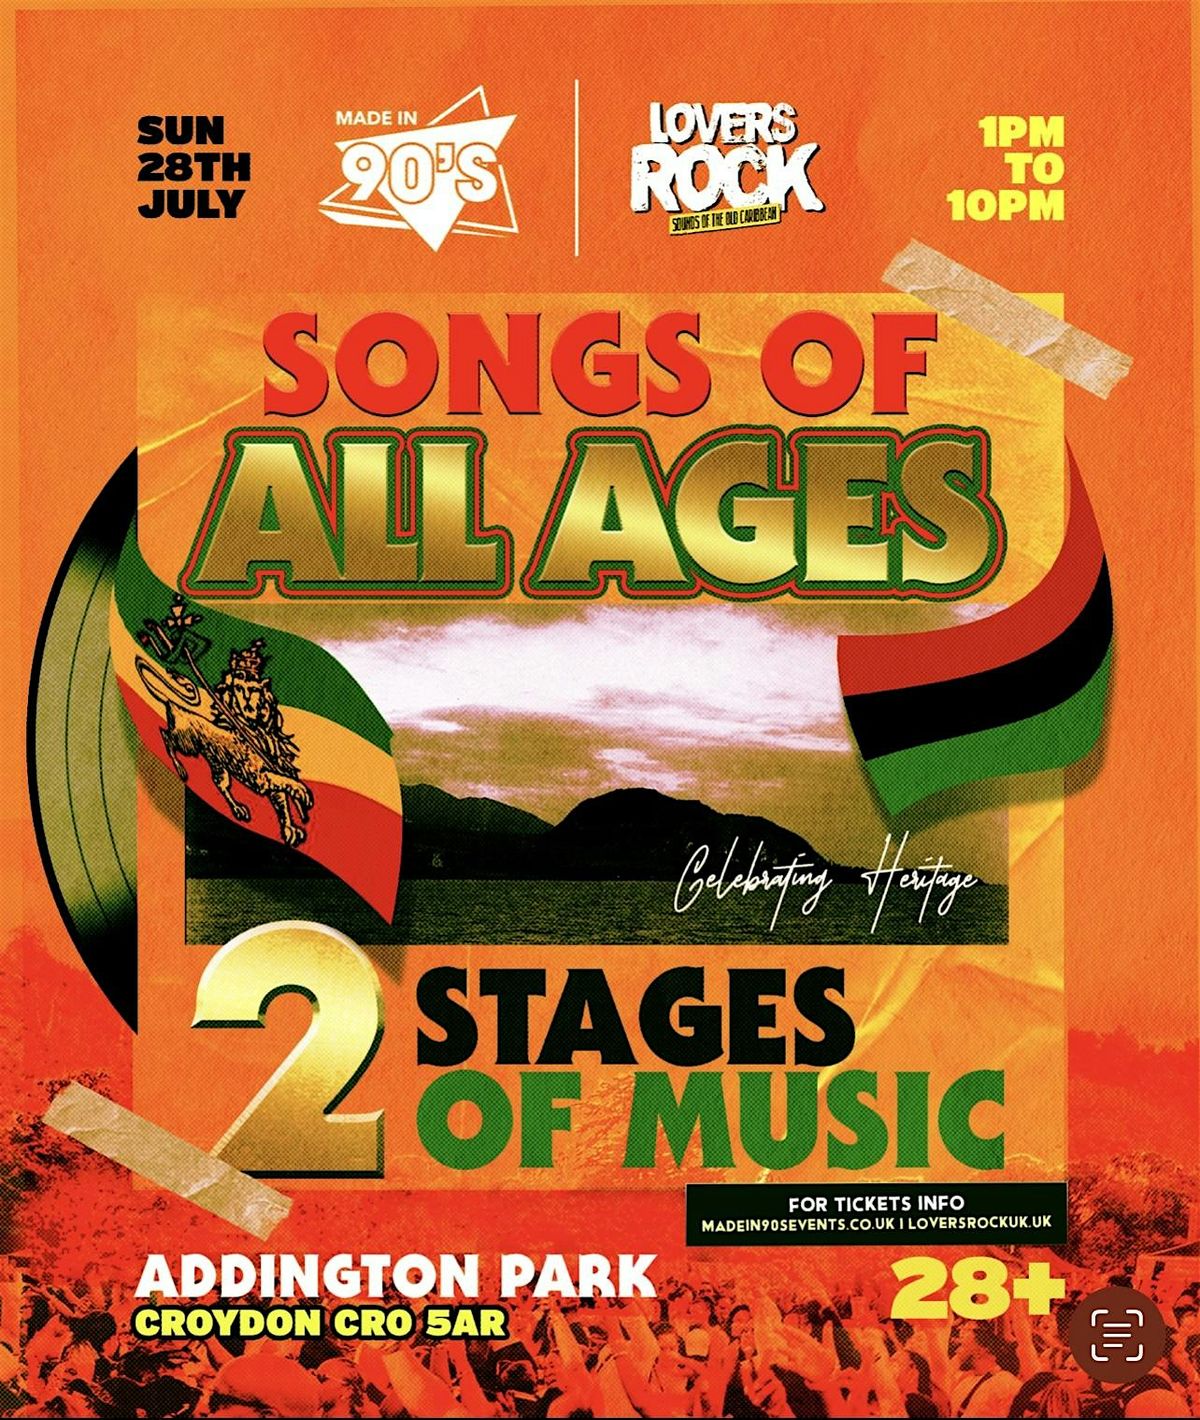 Made In 90s & Lovers Rock Present - SONGS OF ALL AGES!